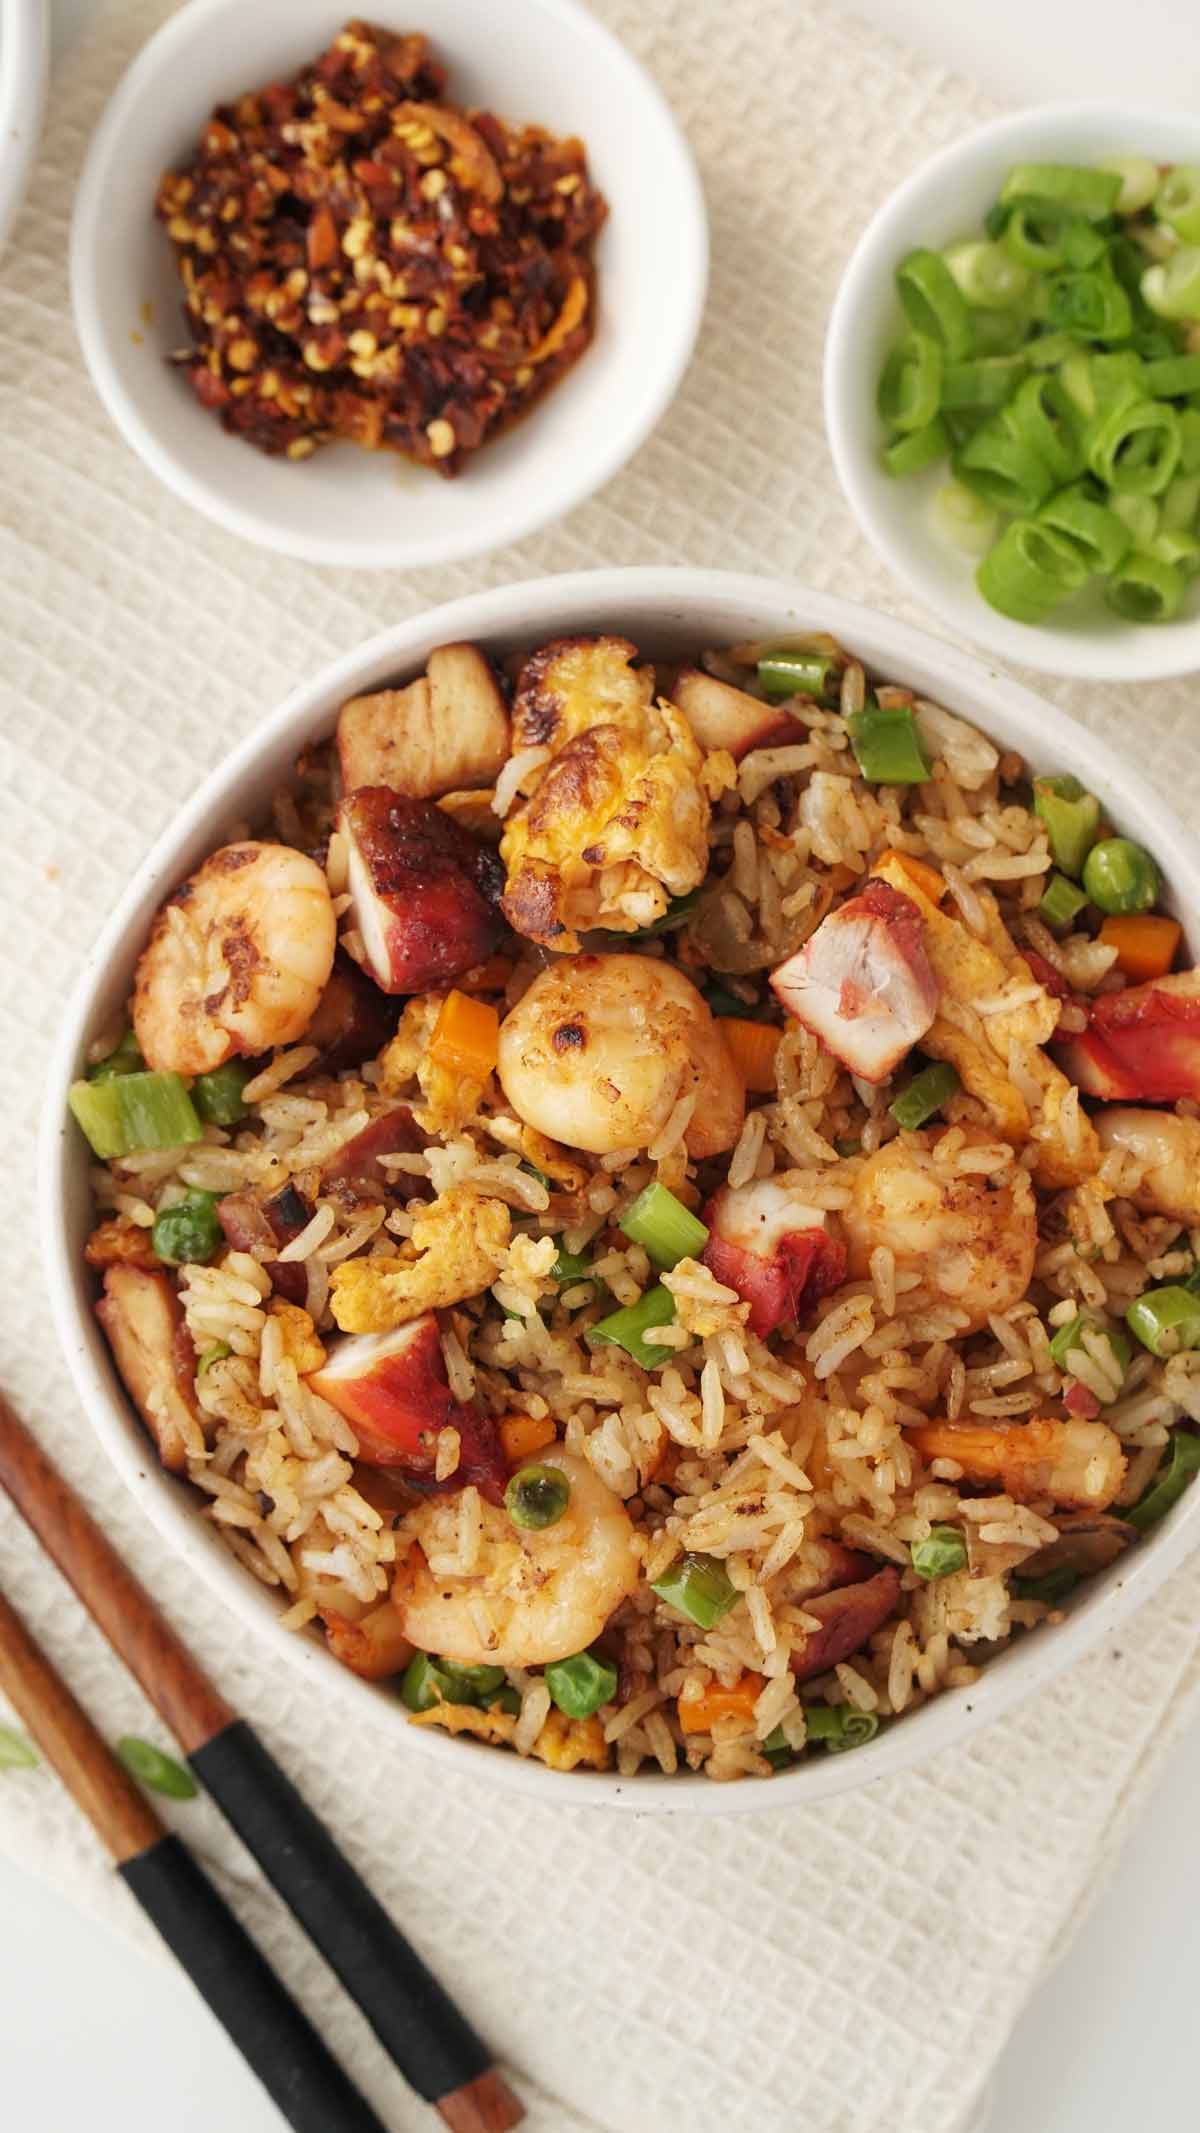 A white bowl containing fried rice with prawns, BBQ meat, and vegetables.